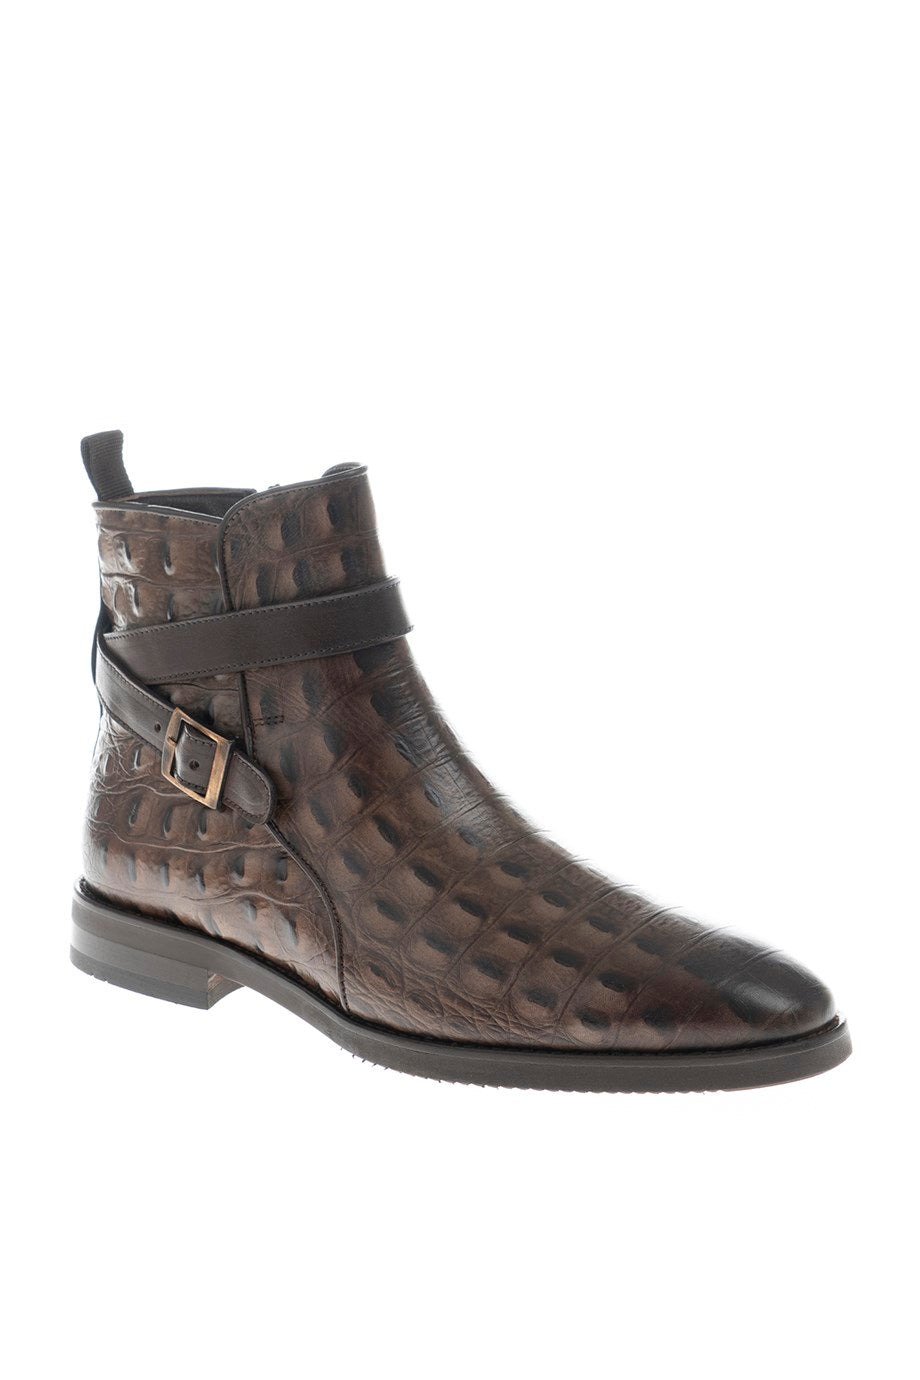 Special Design Crocodile Detail Genuine Leather Boots - MENSTYLEWITH